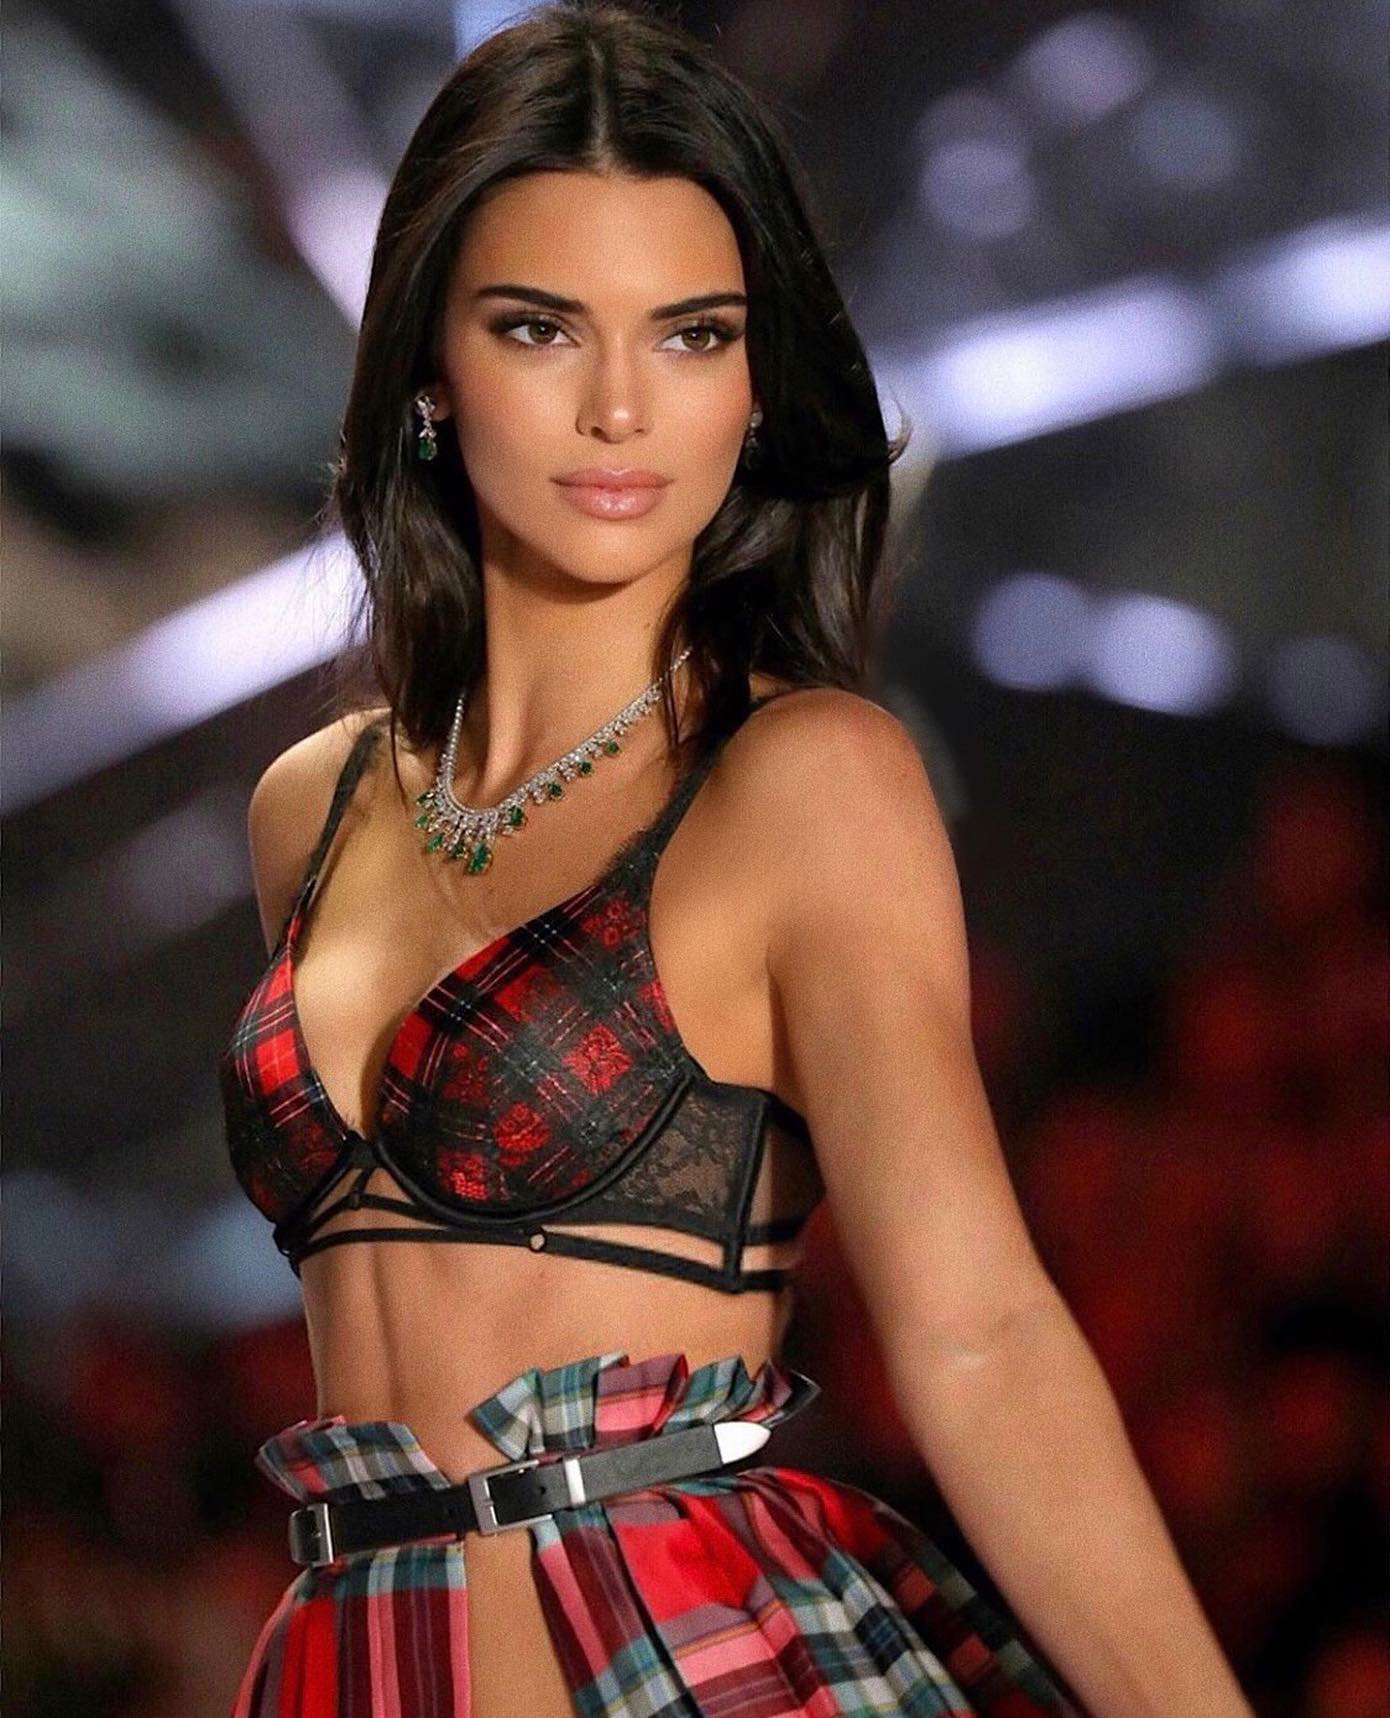 Kendall Jenner Photos Download